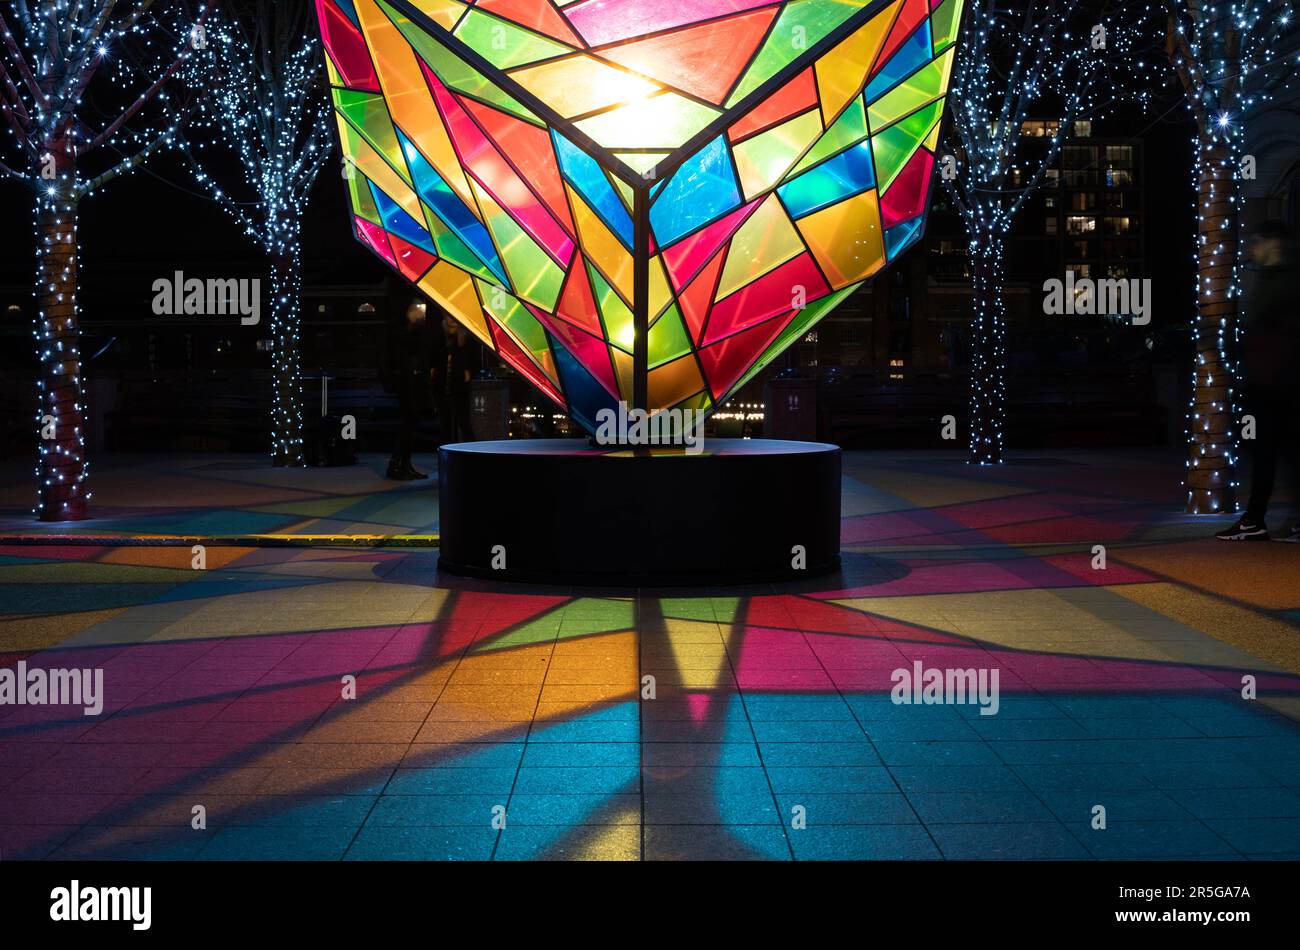 Light artwork Colour Cubed by Mandy Lights. This was part of the Connected by Light winter art light festival at Canary Wharf in 2020. Stock Photo